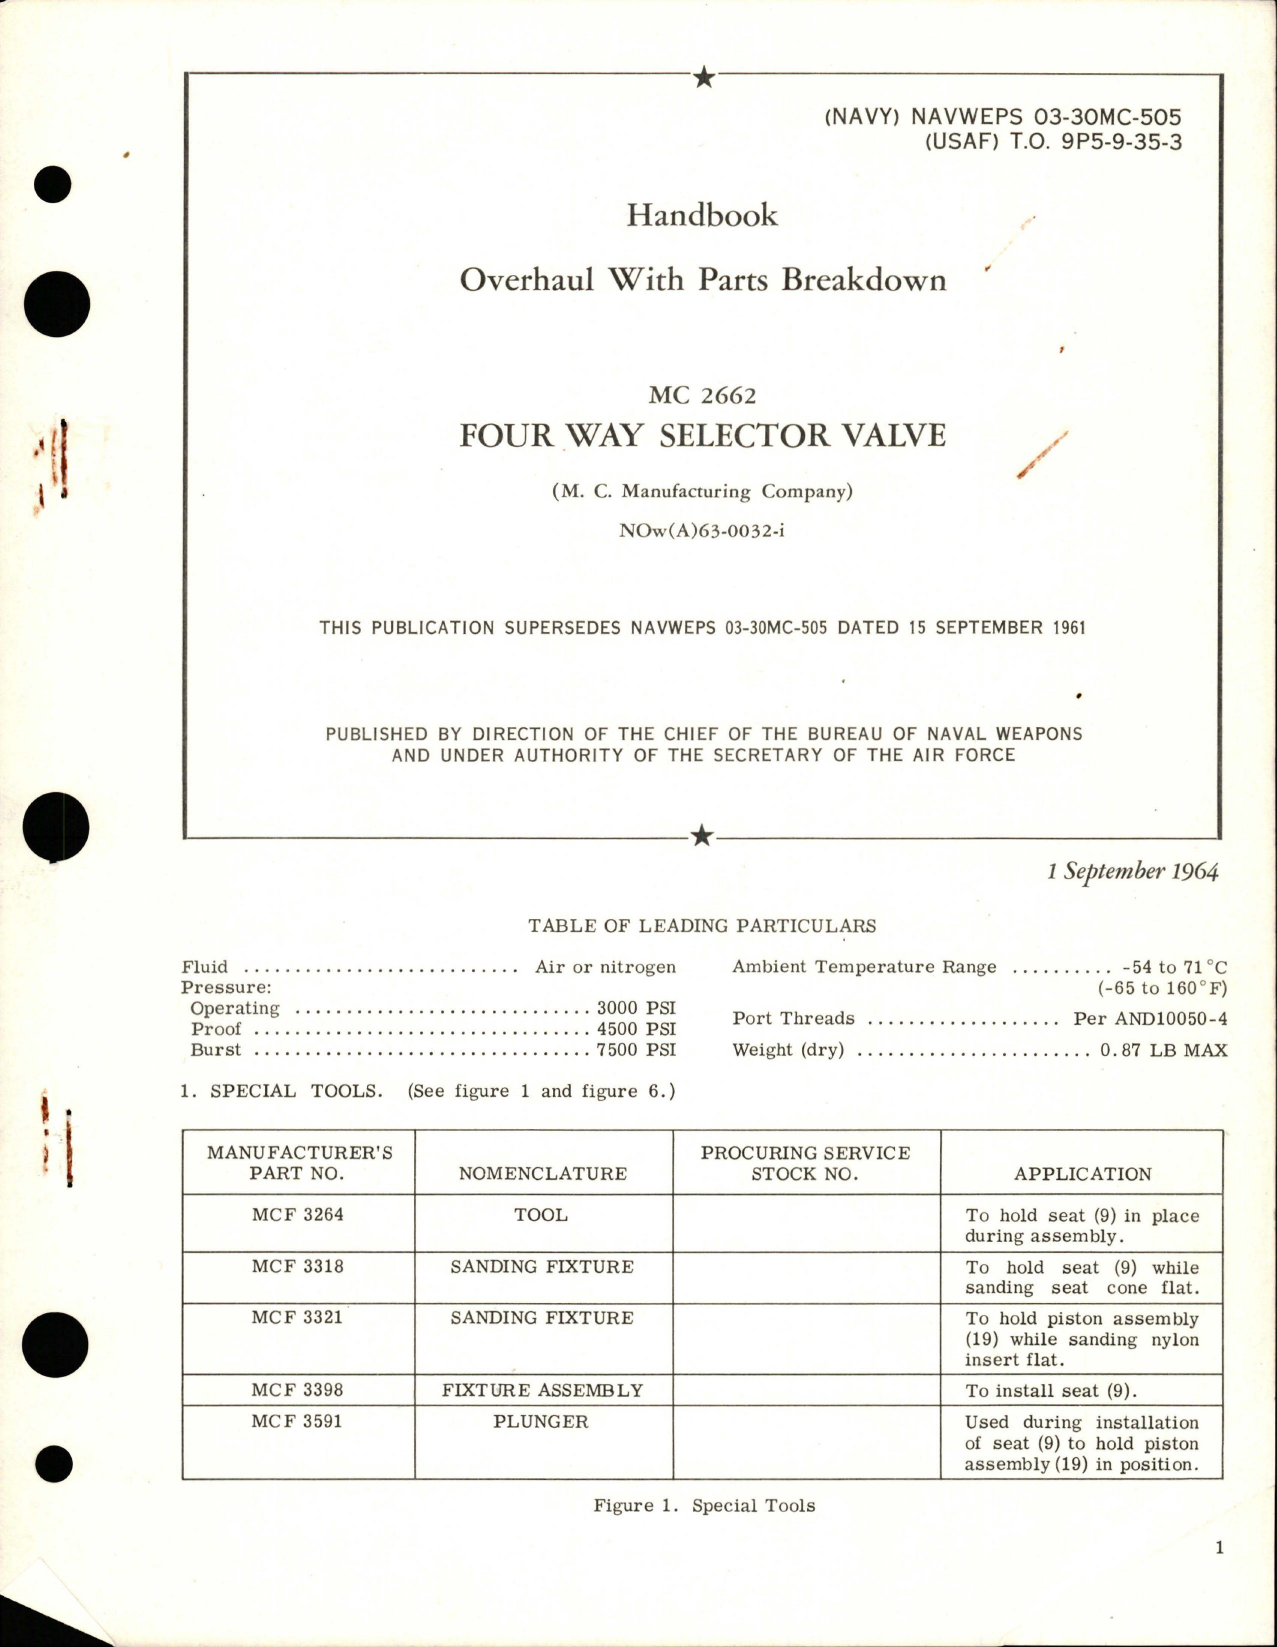 Sample page 1 from AirCorps Library document: Overhaul with Parts Breakdown for Four Way Selector Valve - MC 2662 